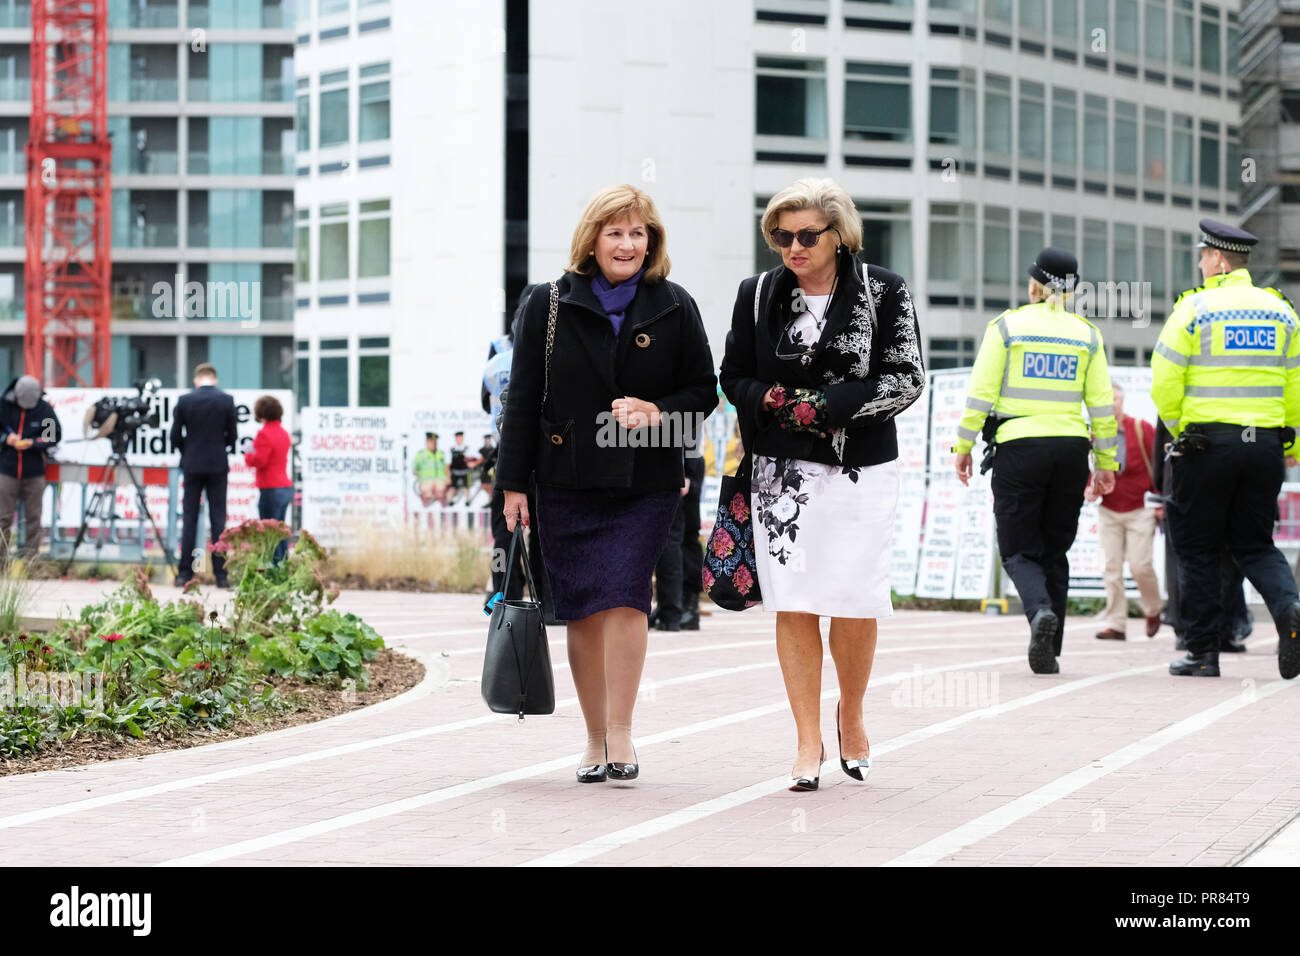 Birmingham, UK. 30th September 2018. Tory party delegates arrive for the first day of the Conservative Party Conference at the ICC in Birmingham  - Photo Steven May / Alamy Live News Stock Photo